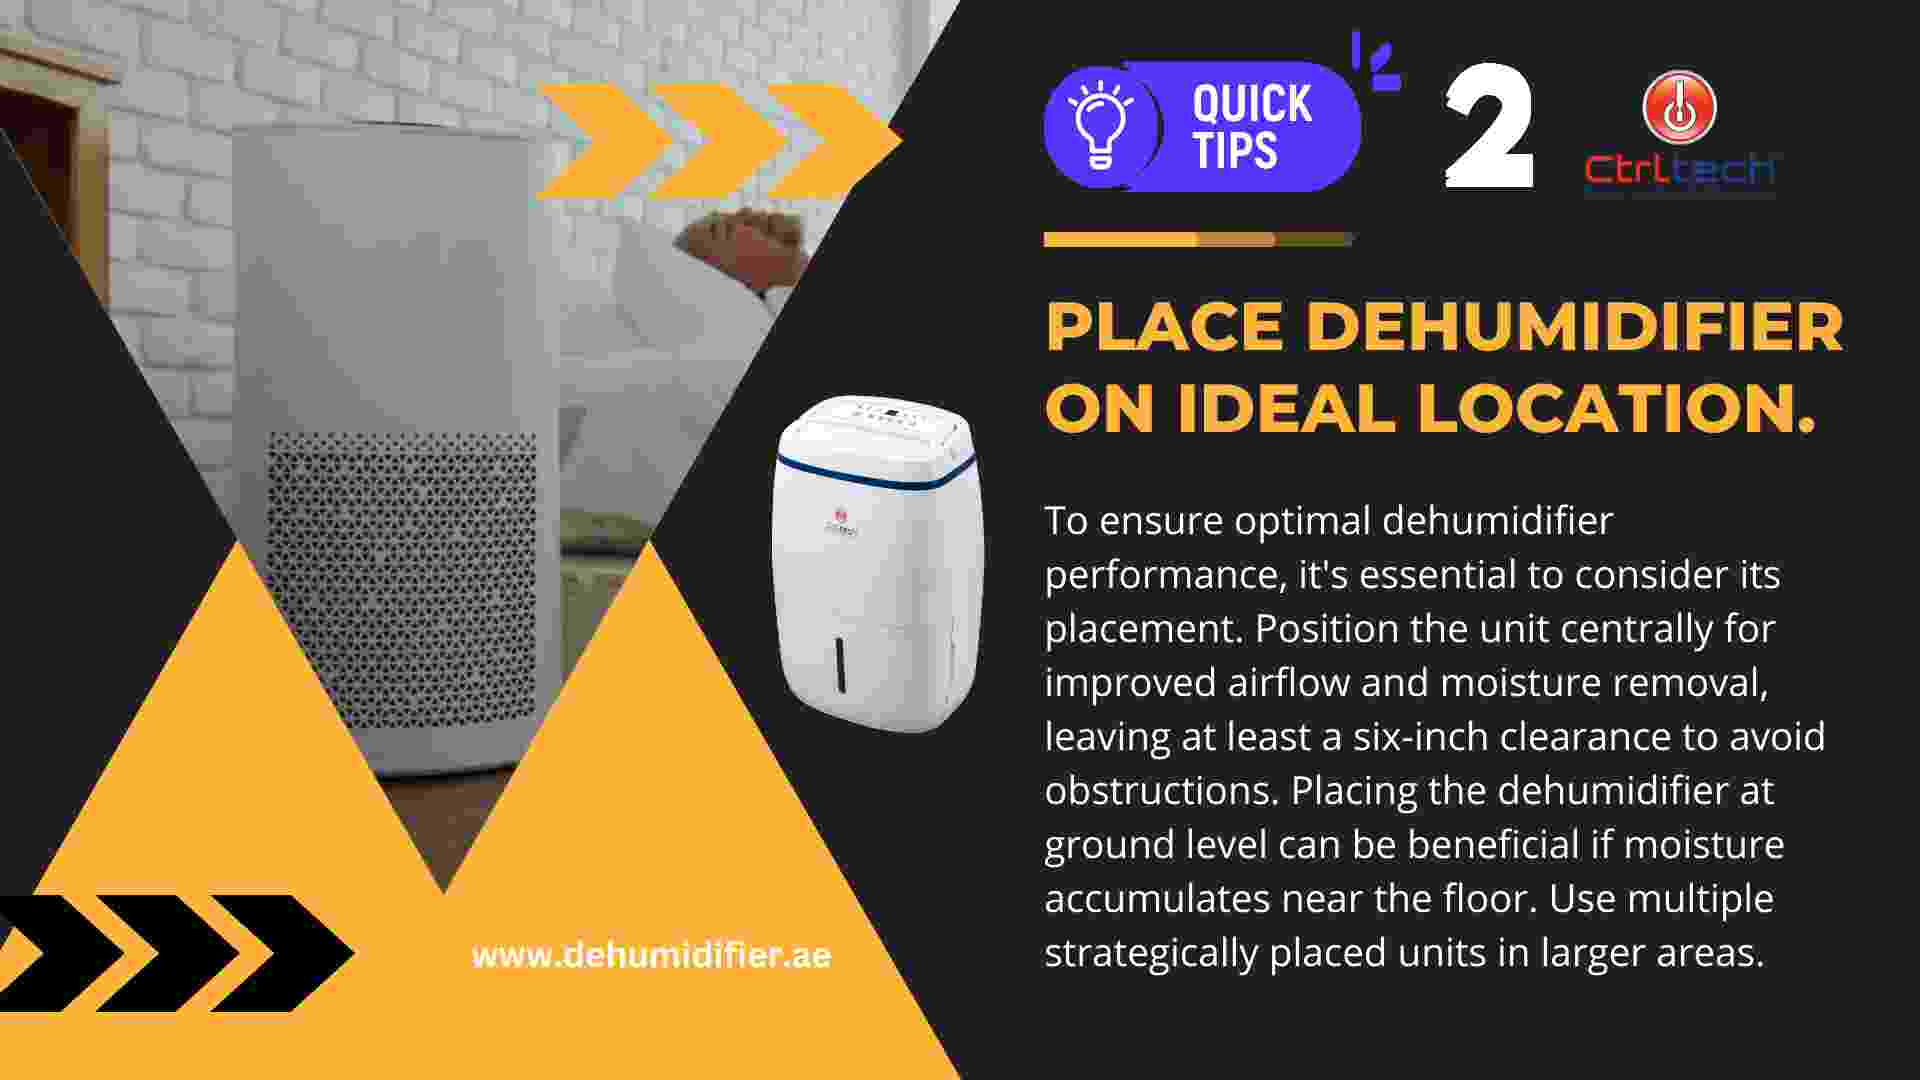 Tip 2 - Finding the Ideal Location for dehumidifier